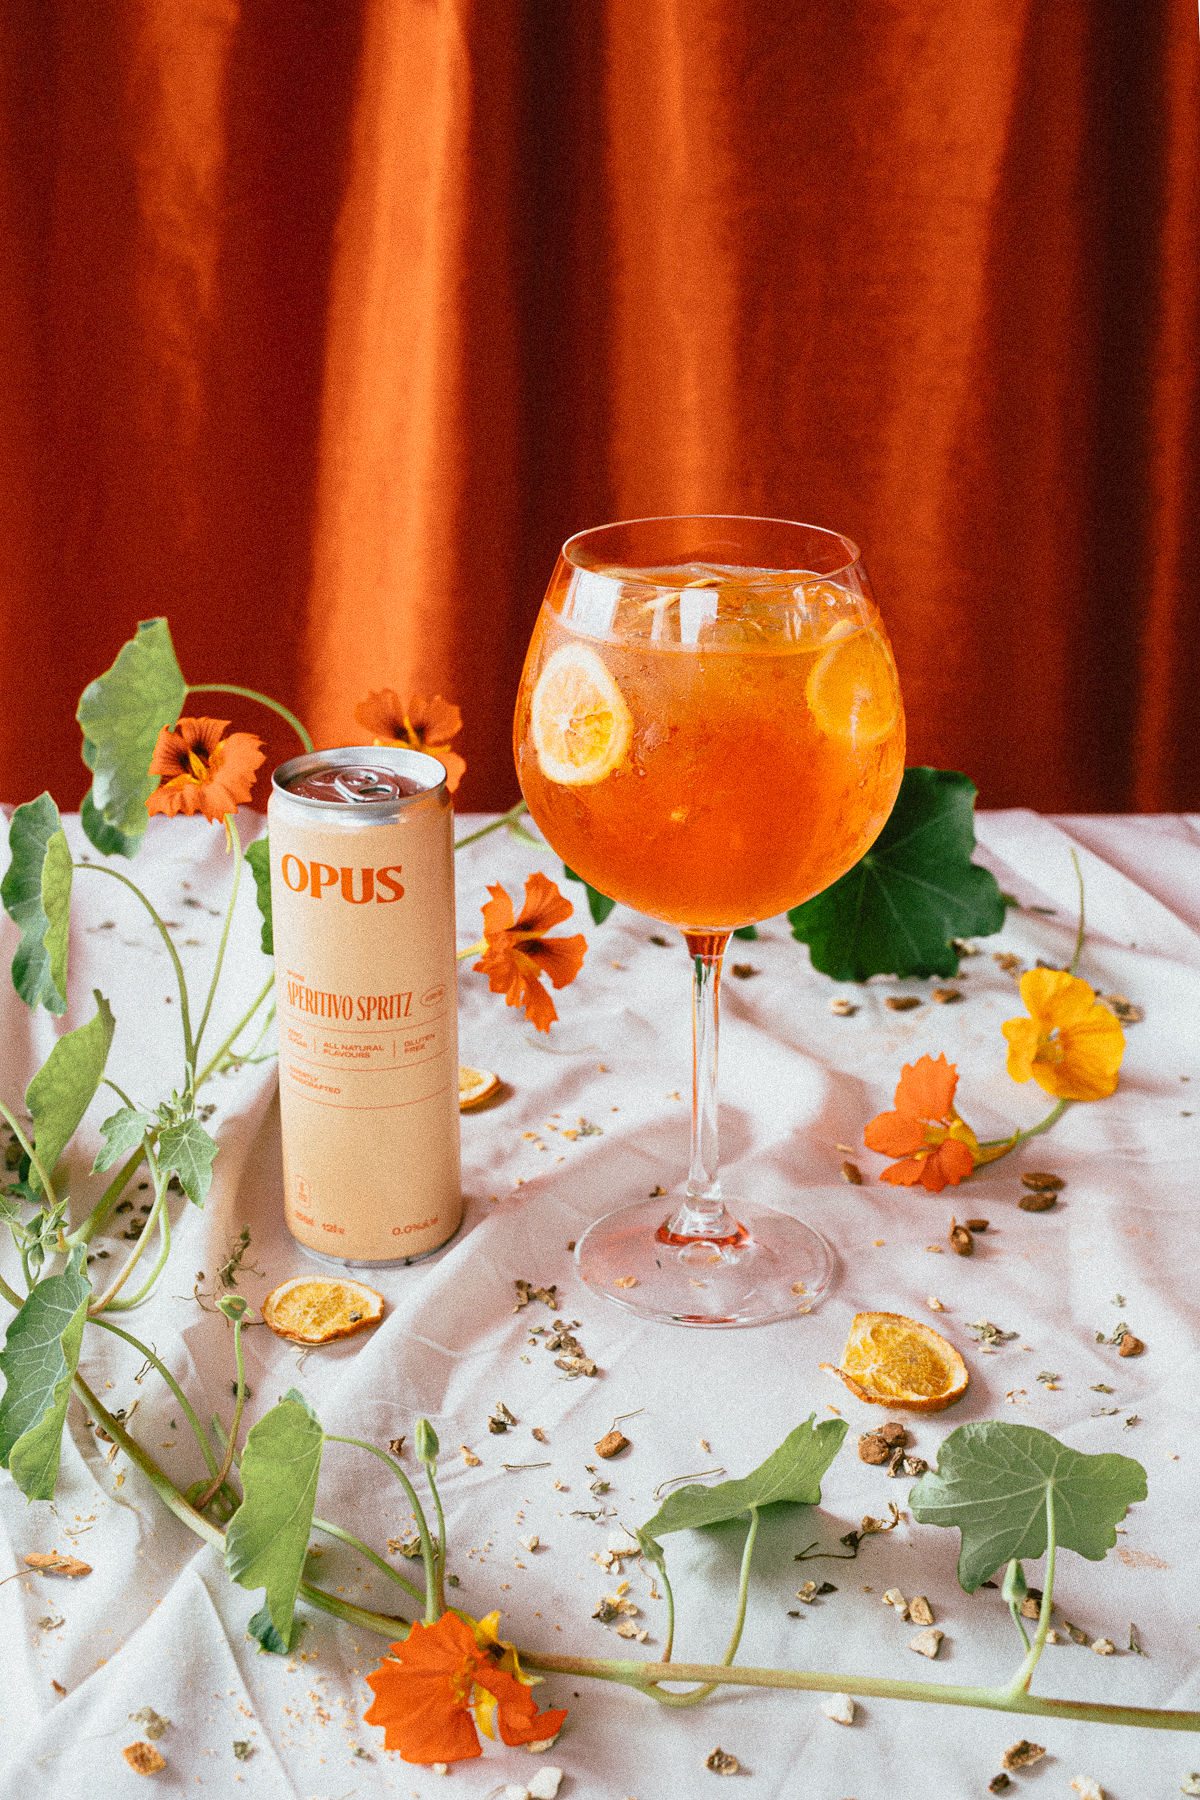 A white tablecloth covered in flowers, dried fruit, and spices. Standing upright is a glass filled with aperitivo spritz, next to an opened OPUS can